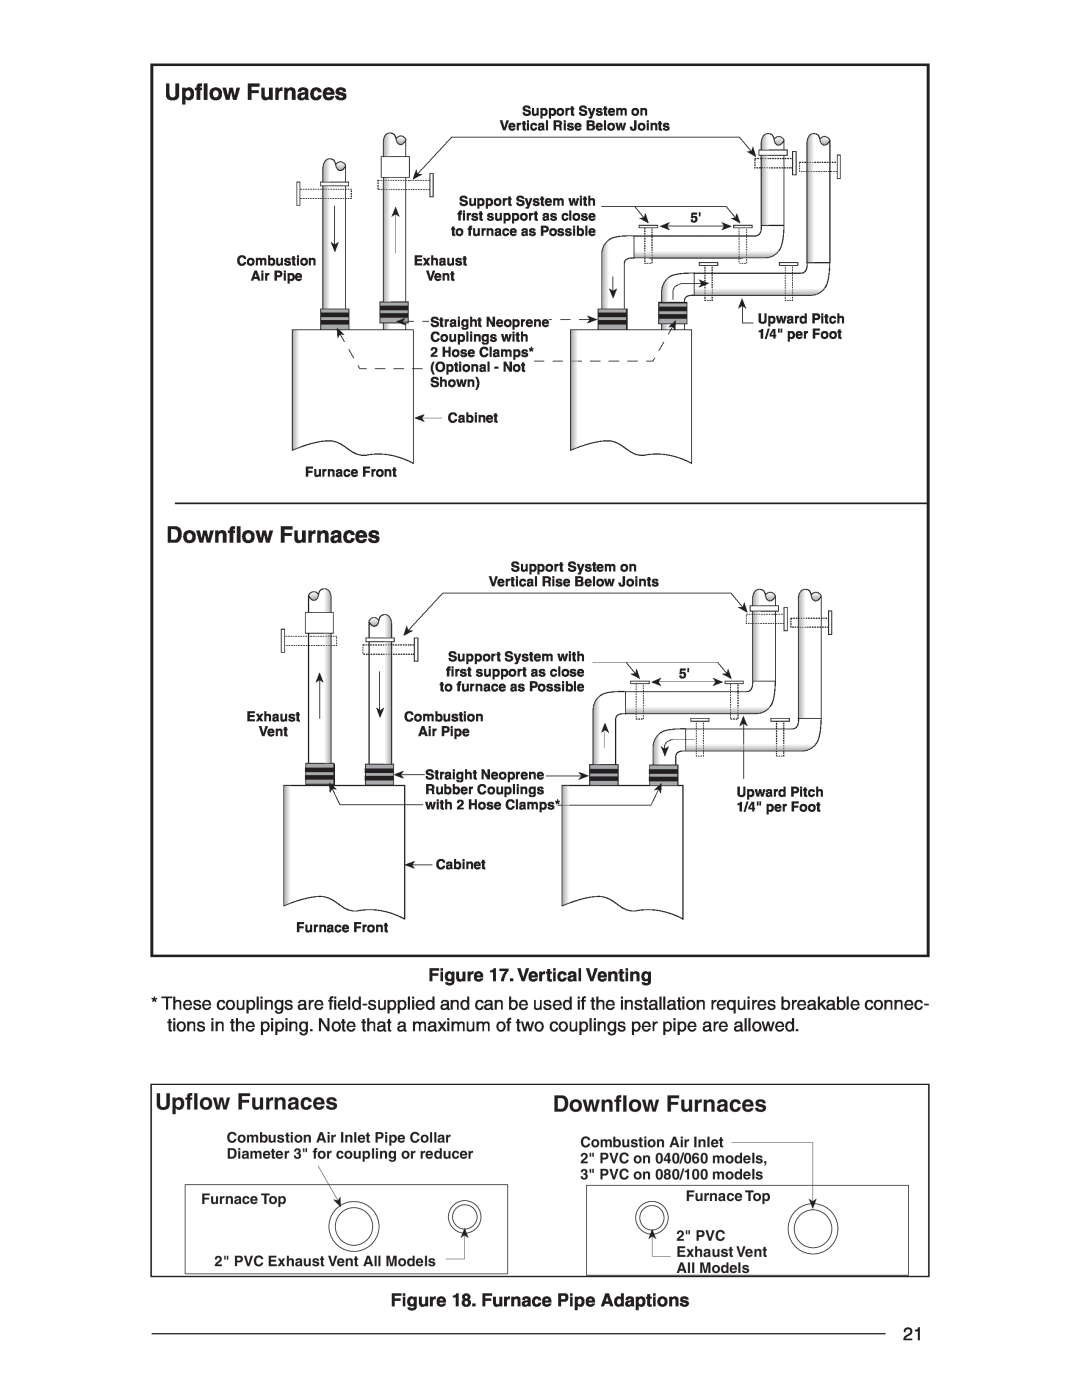 Nordyne RC 92+, RL 90+ installation instructions Upﬂow Furnaces, Downﬂow Furnaces, Vertical Venting, Furnace Pipe Adaptions 